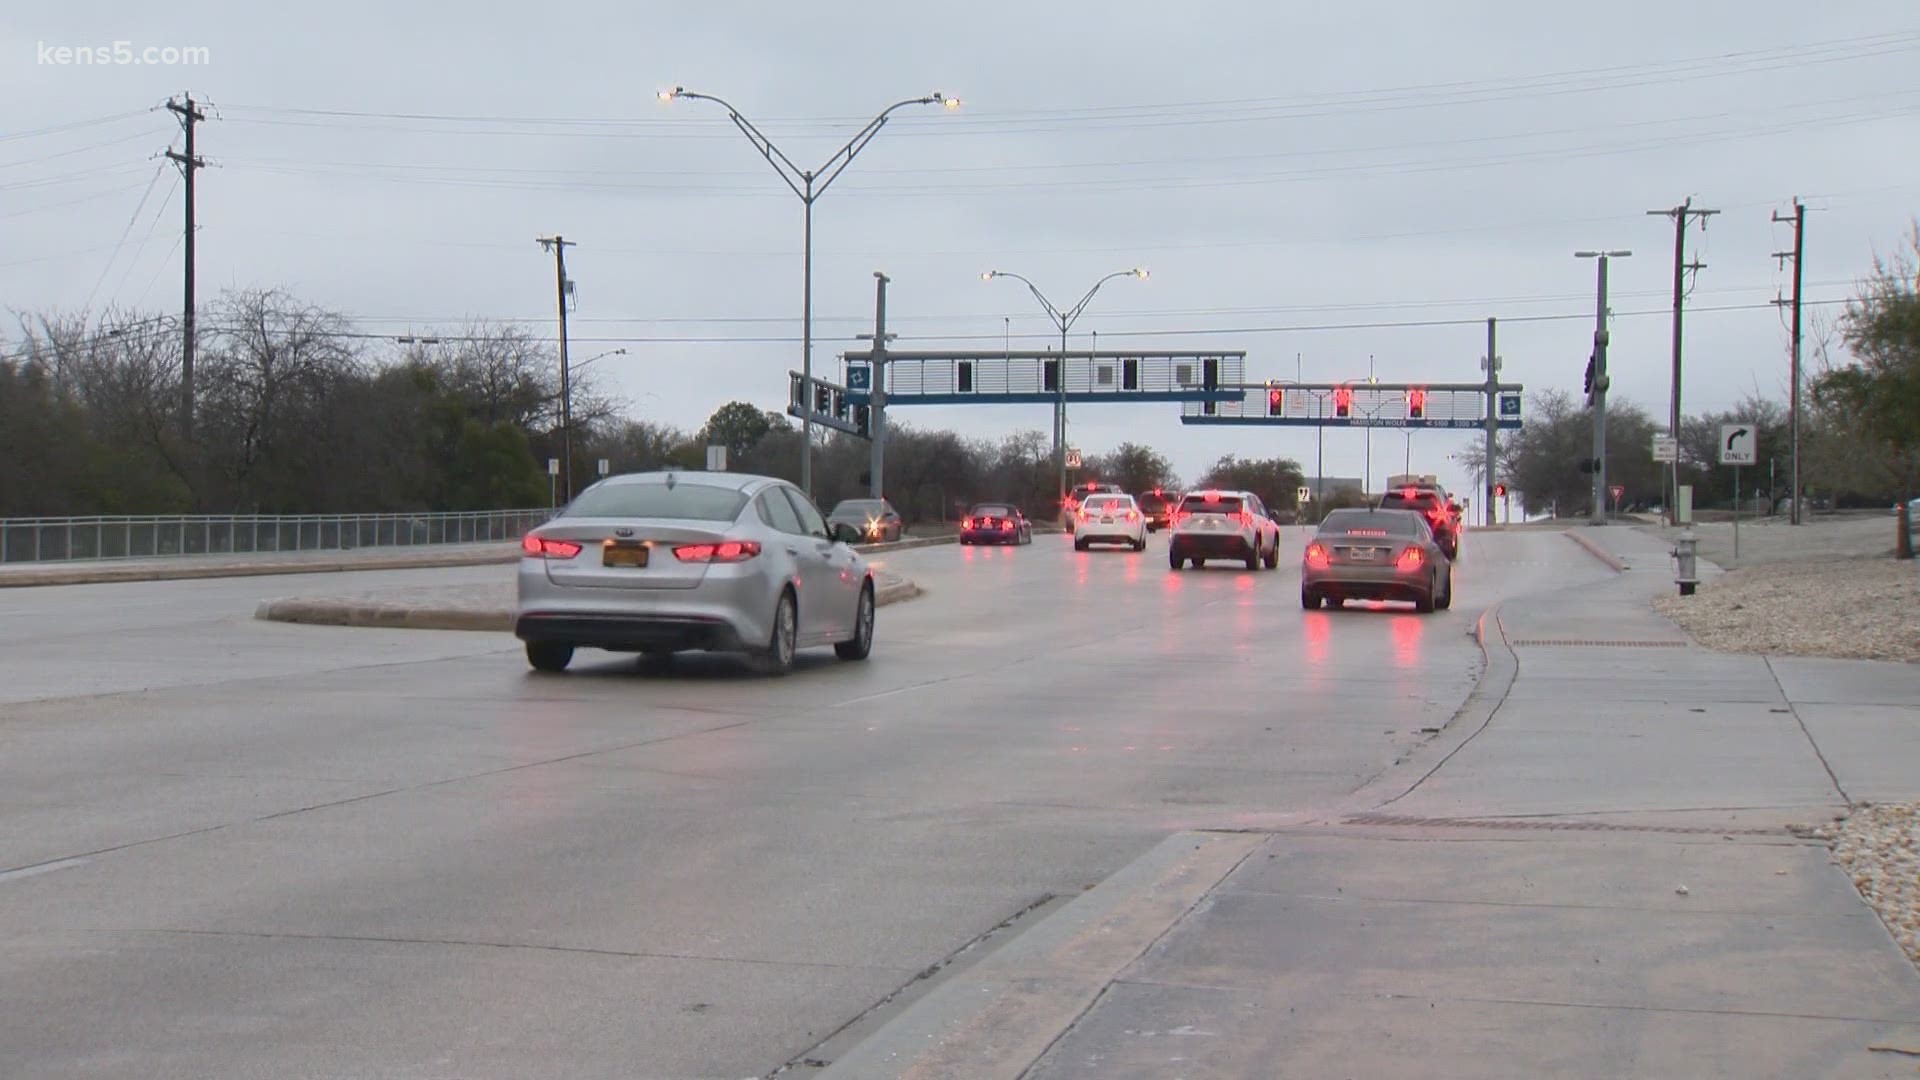 TxDOT provides more details about road closures in the San Antonio area.